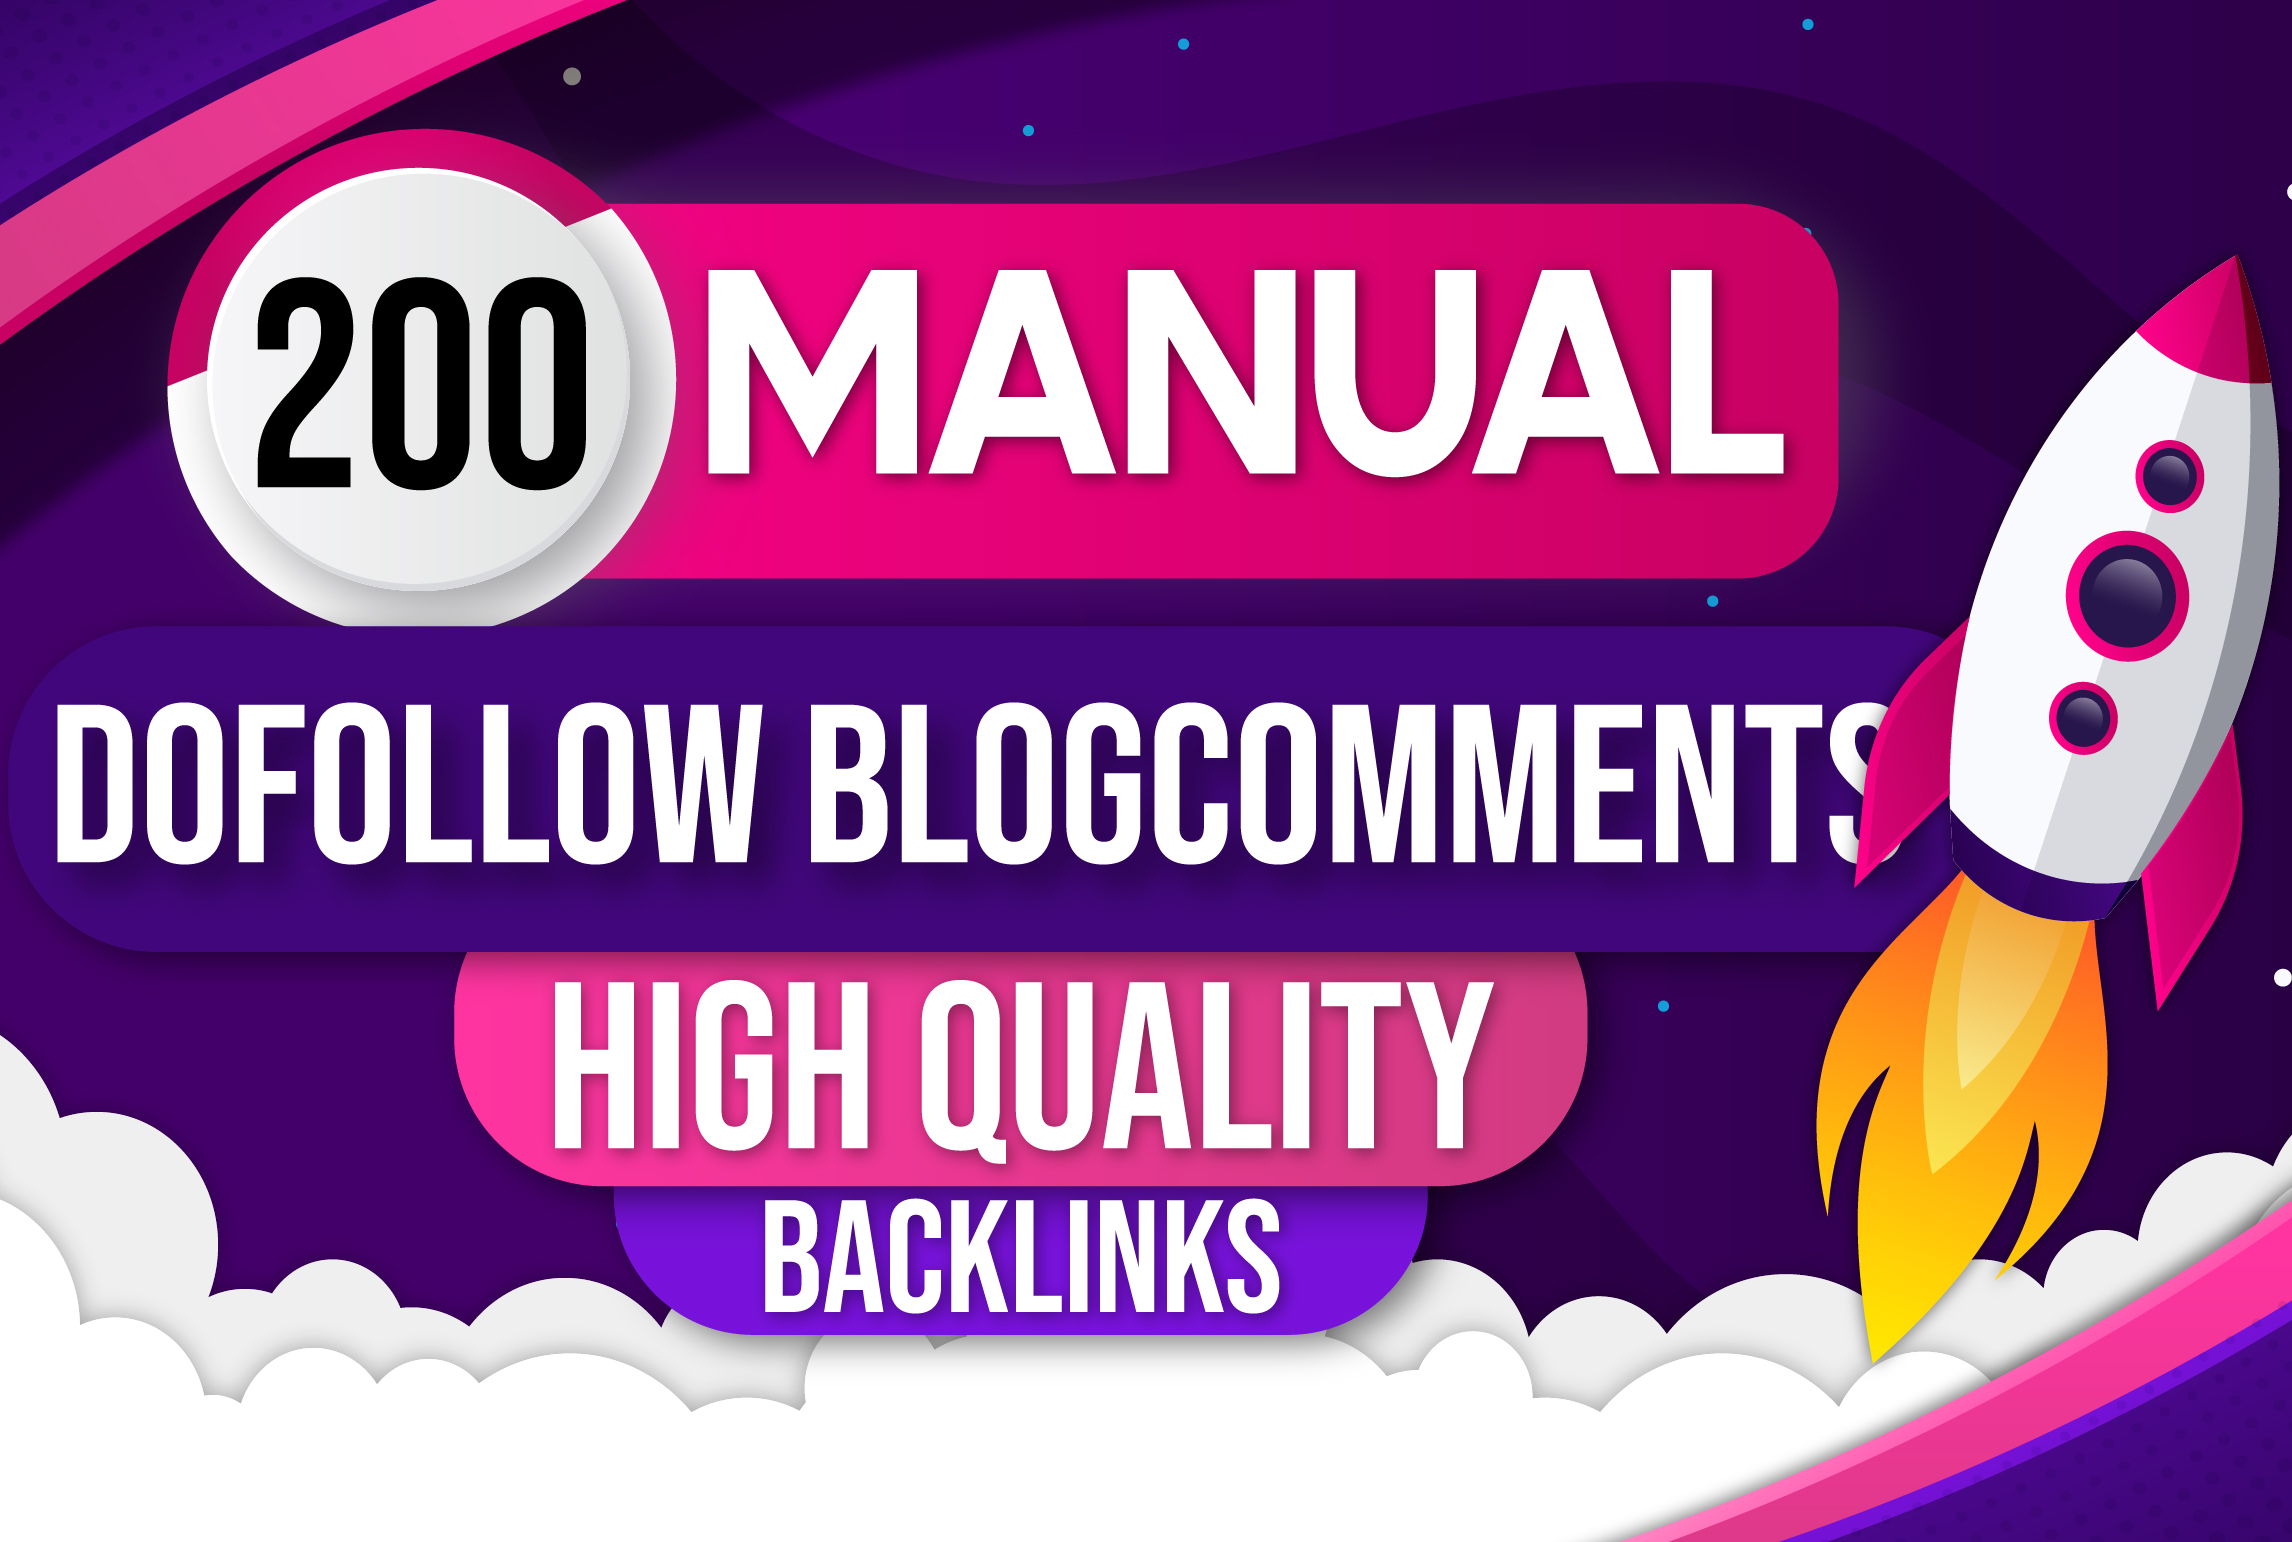 I Will Provide 200 Blog Comments Dofollow Links Low OBL High Da Pa